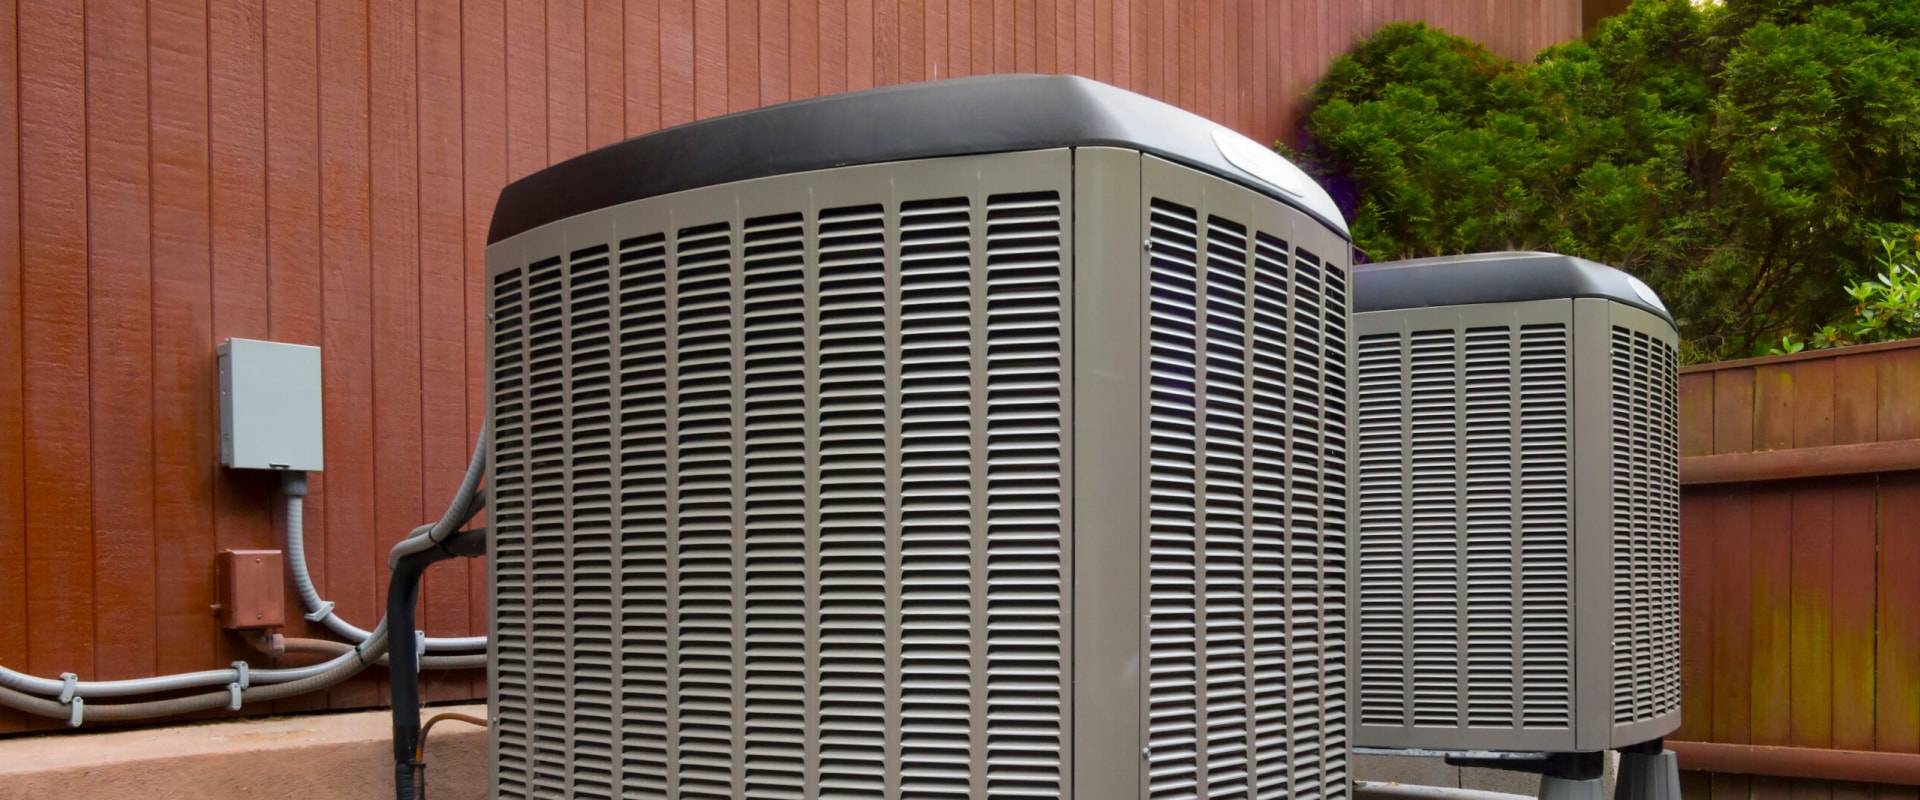 Which ac is most reliable?